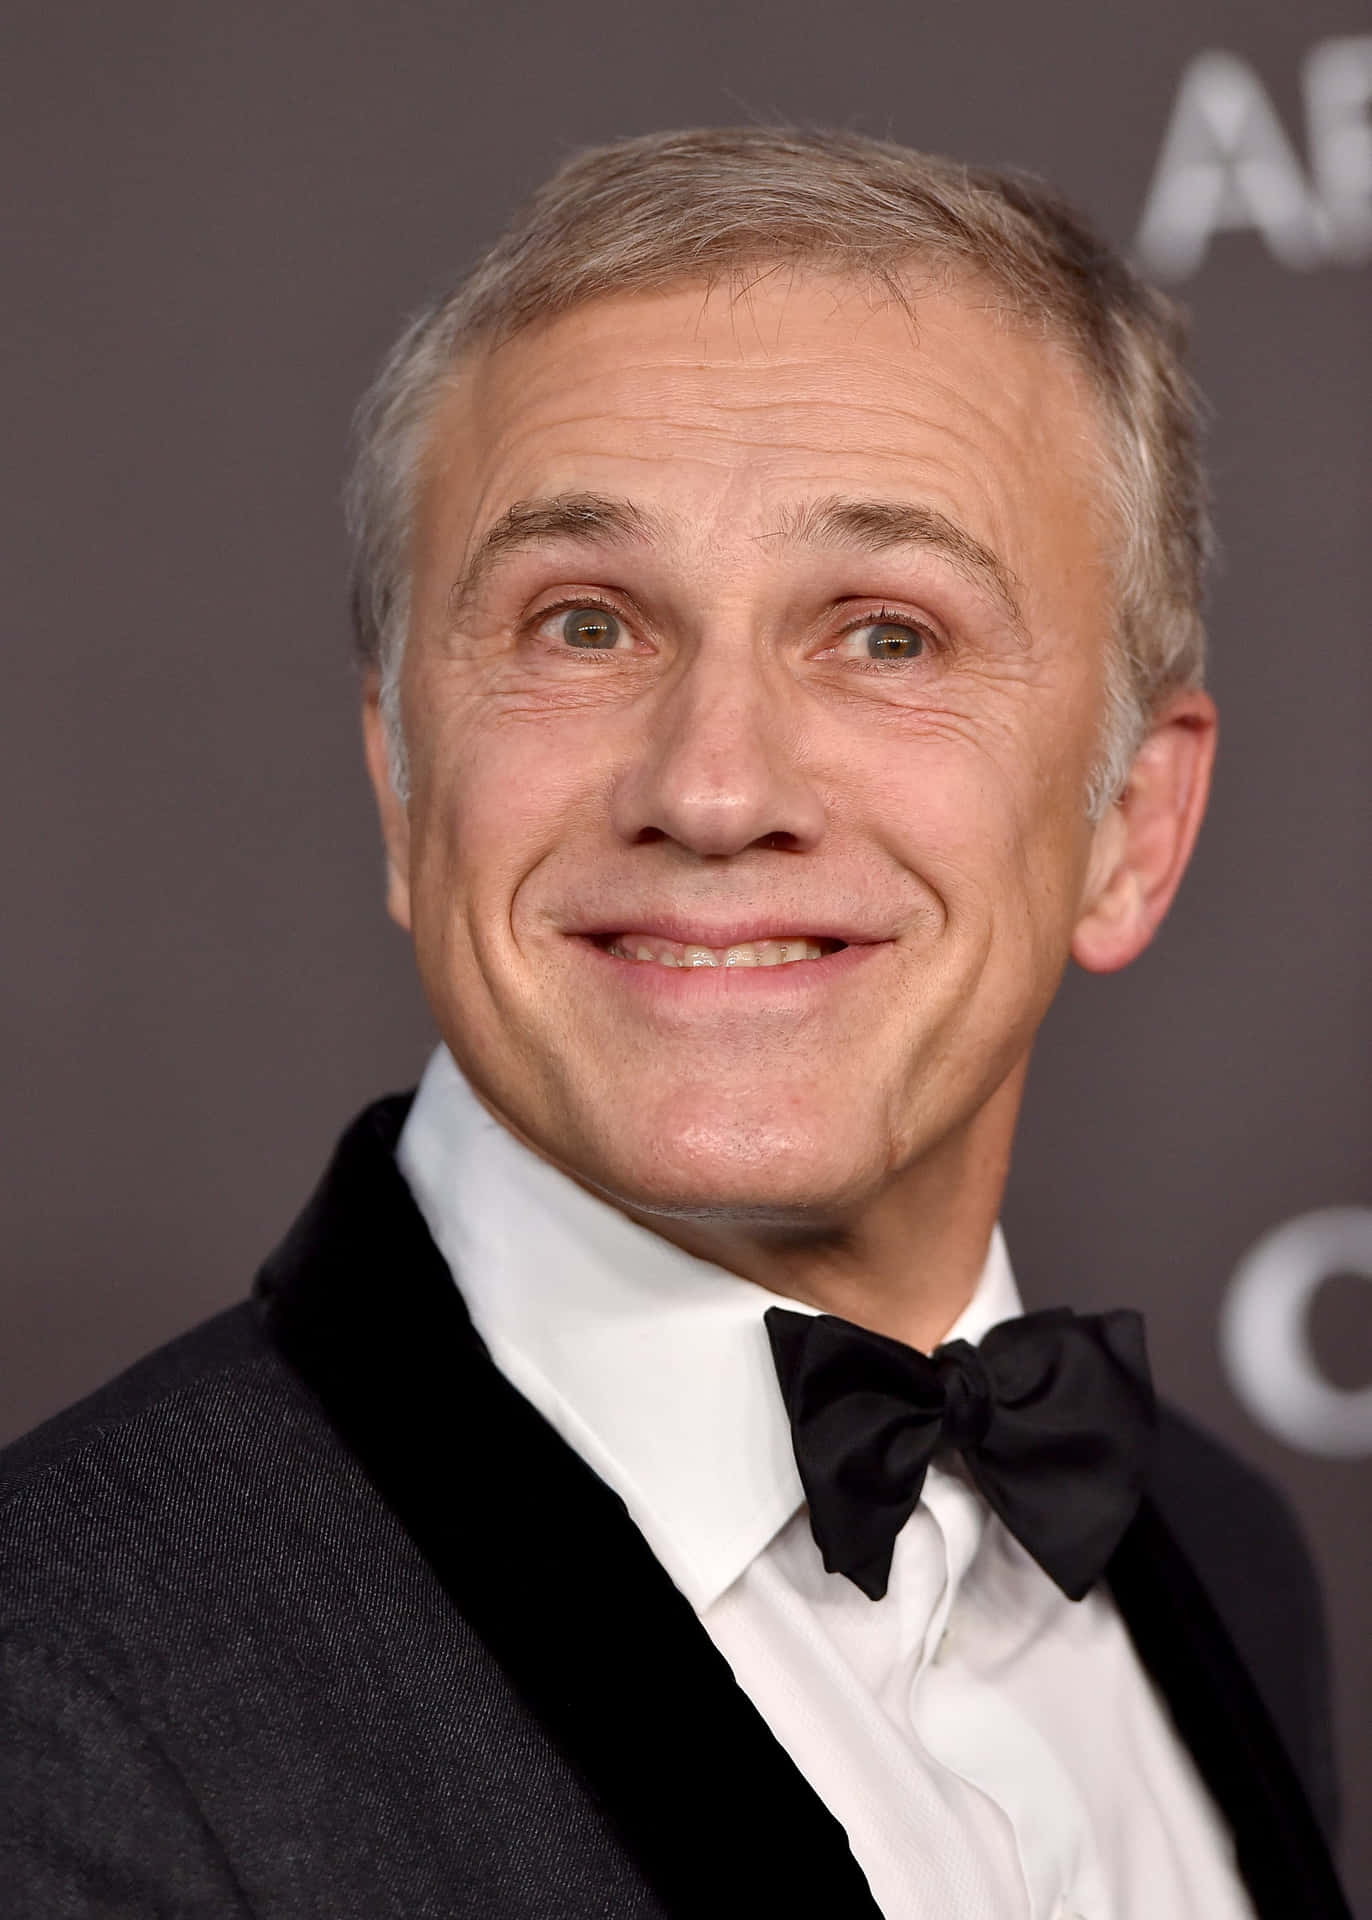 In The Context Of Computer Or Mobile Wallpaper, This Sentence Would Refer To A Wallpaper Featuring The Actor Christoph Waltz. Fondo de pantalla